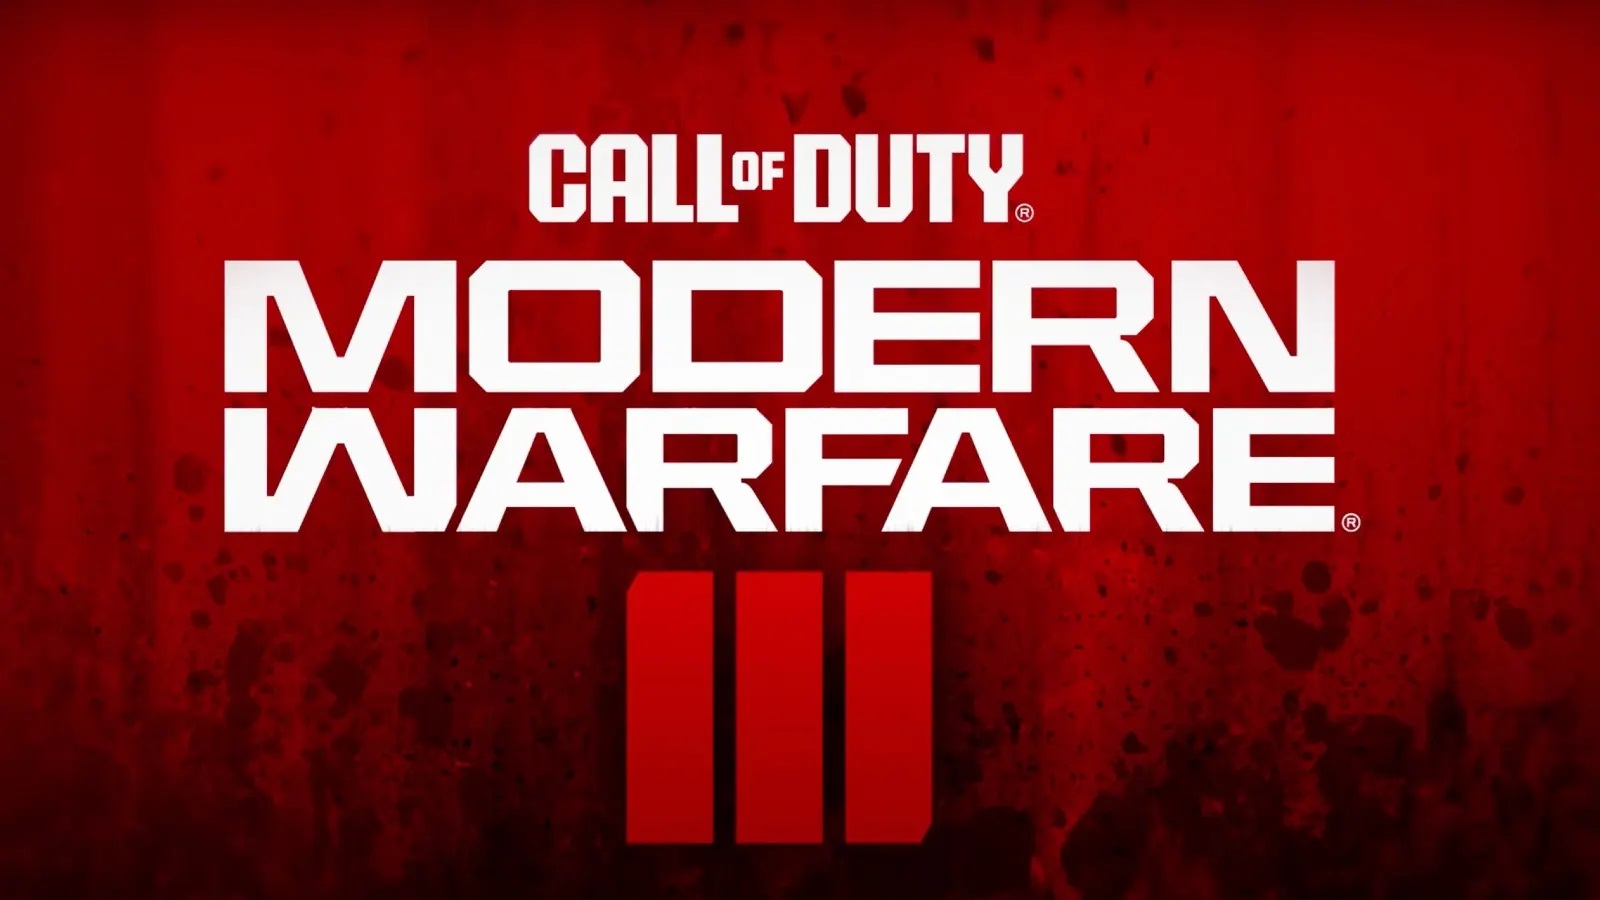 Call of Duty Modern Warfare 2 Beta: Start date and how to get access